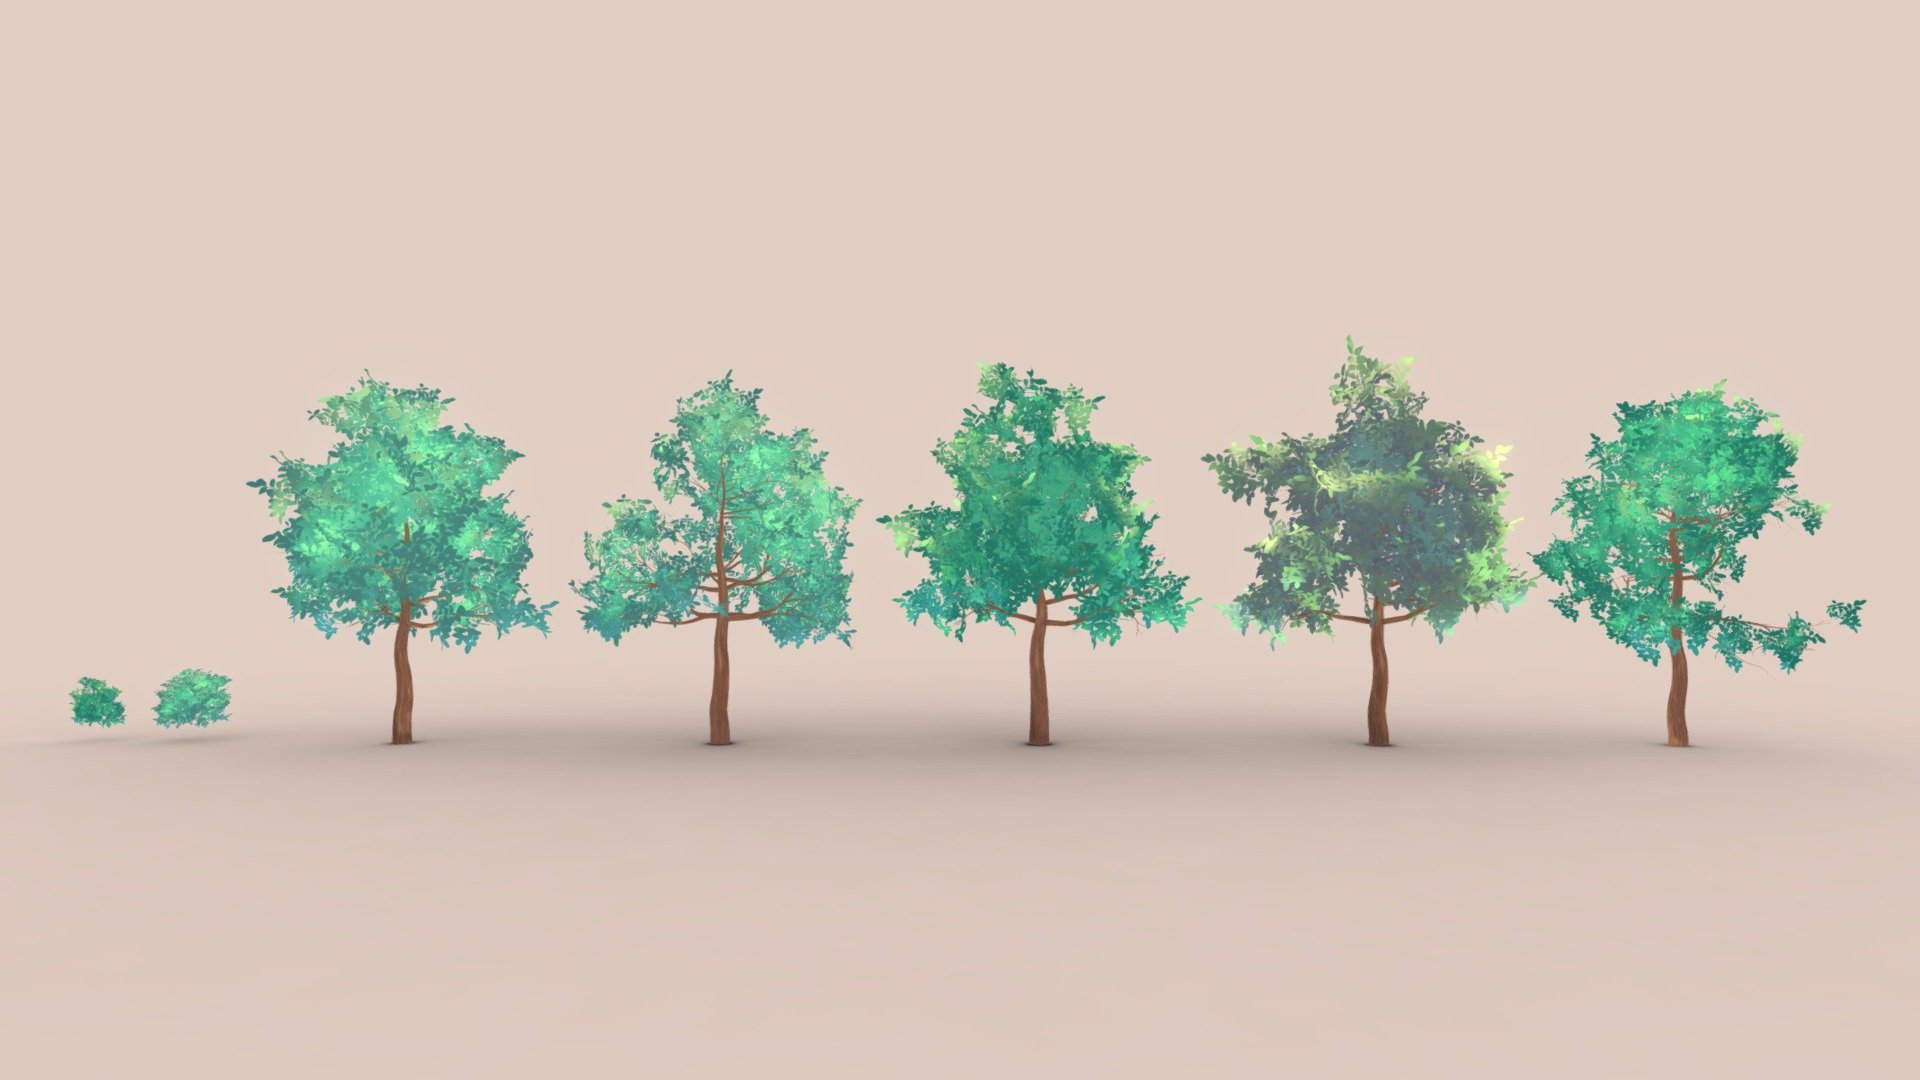 Anime Trees and Bushes version 4.0

This is a new technique compared to my previous anime tree versions

Just plug the textures on emission, or diffuse shader. No need for ambient occlusion. And voilà! They are ready!

They have an even more natural painting feeling than before, and they are close to real anime trees more than ever 😁😁
Enjoy ❤🌈😇

*Last Update on 20 January 2022
The textures of the trunks have been updated to a better version

Please check the latest version of Anime Trees on my profile, Anime Trees Highpoly. They look even better although they are highpoly - Anime Trees And Bushes (Handpainted) - Buy Royalty Free 3D model by ahingel 3d model